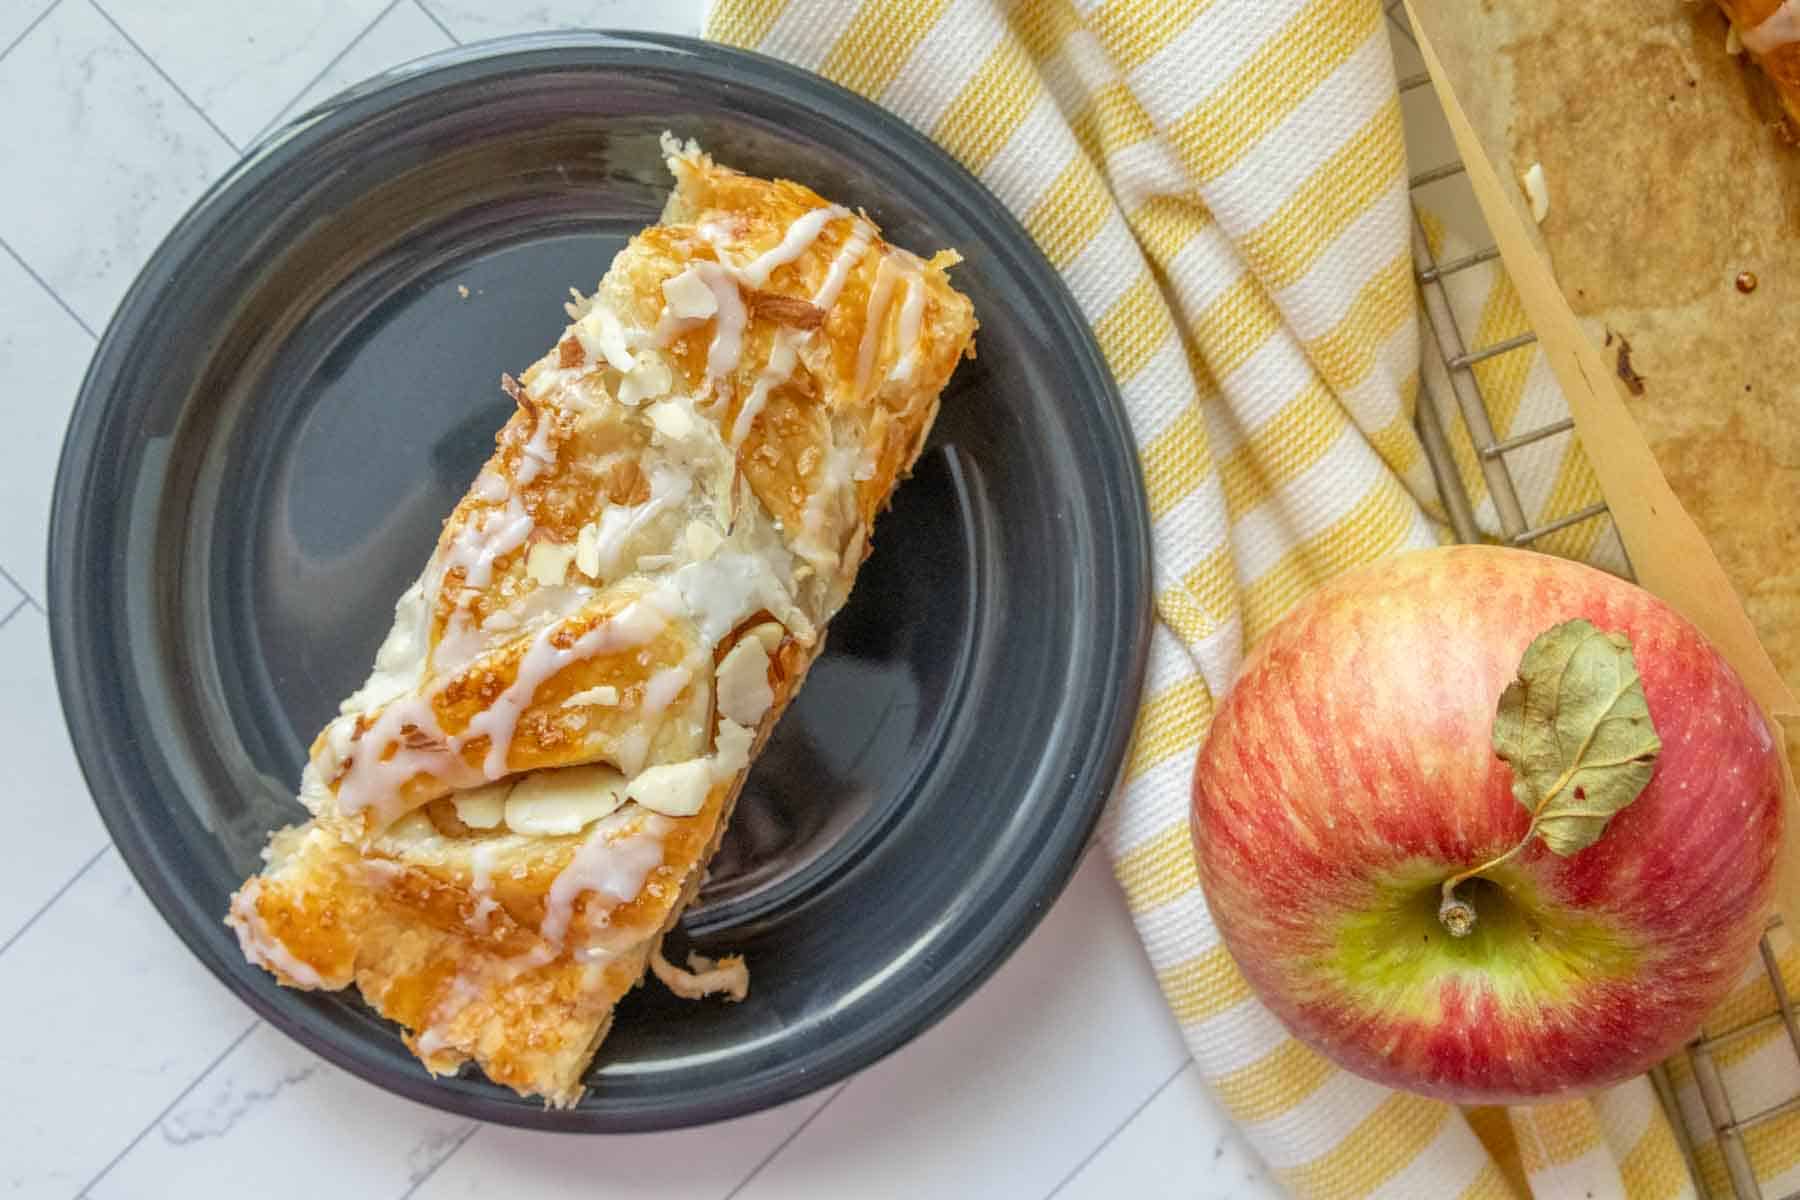 A slice of apple pastry on a plate next to an apple.